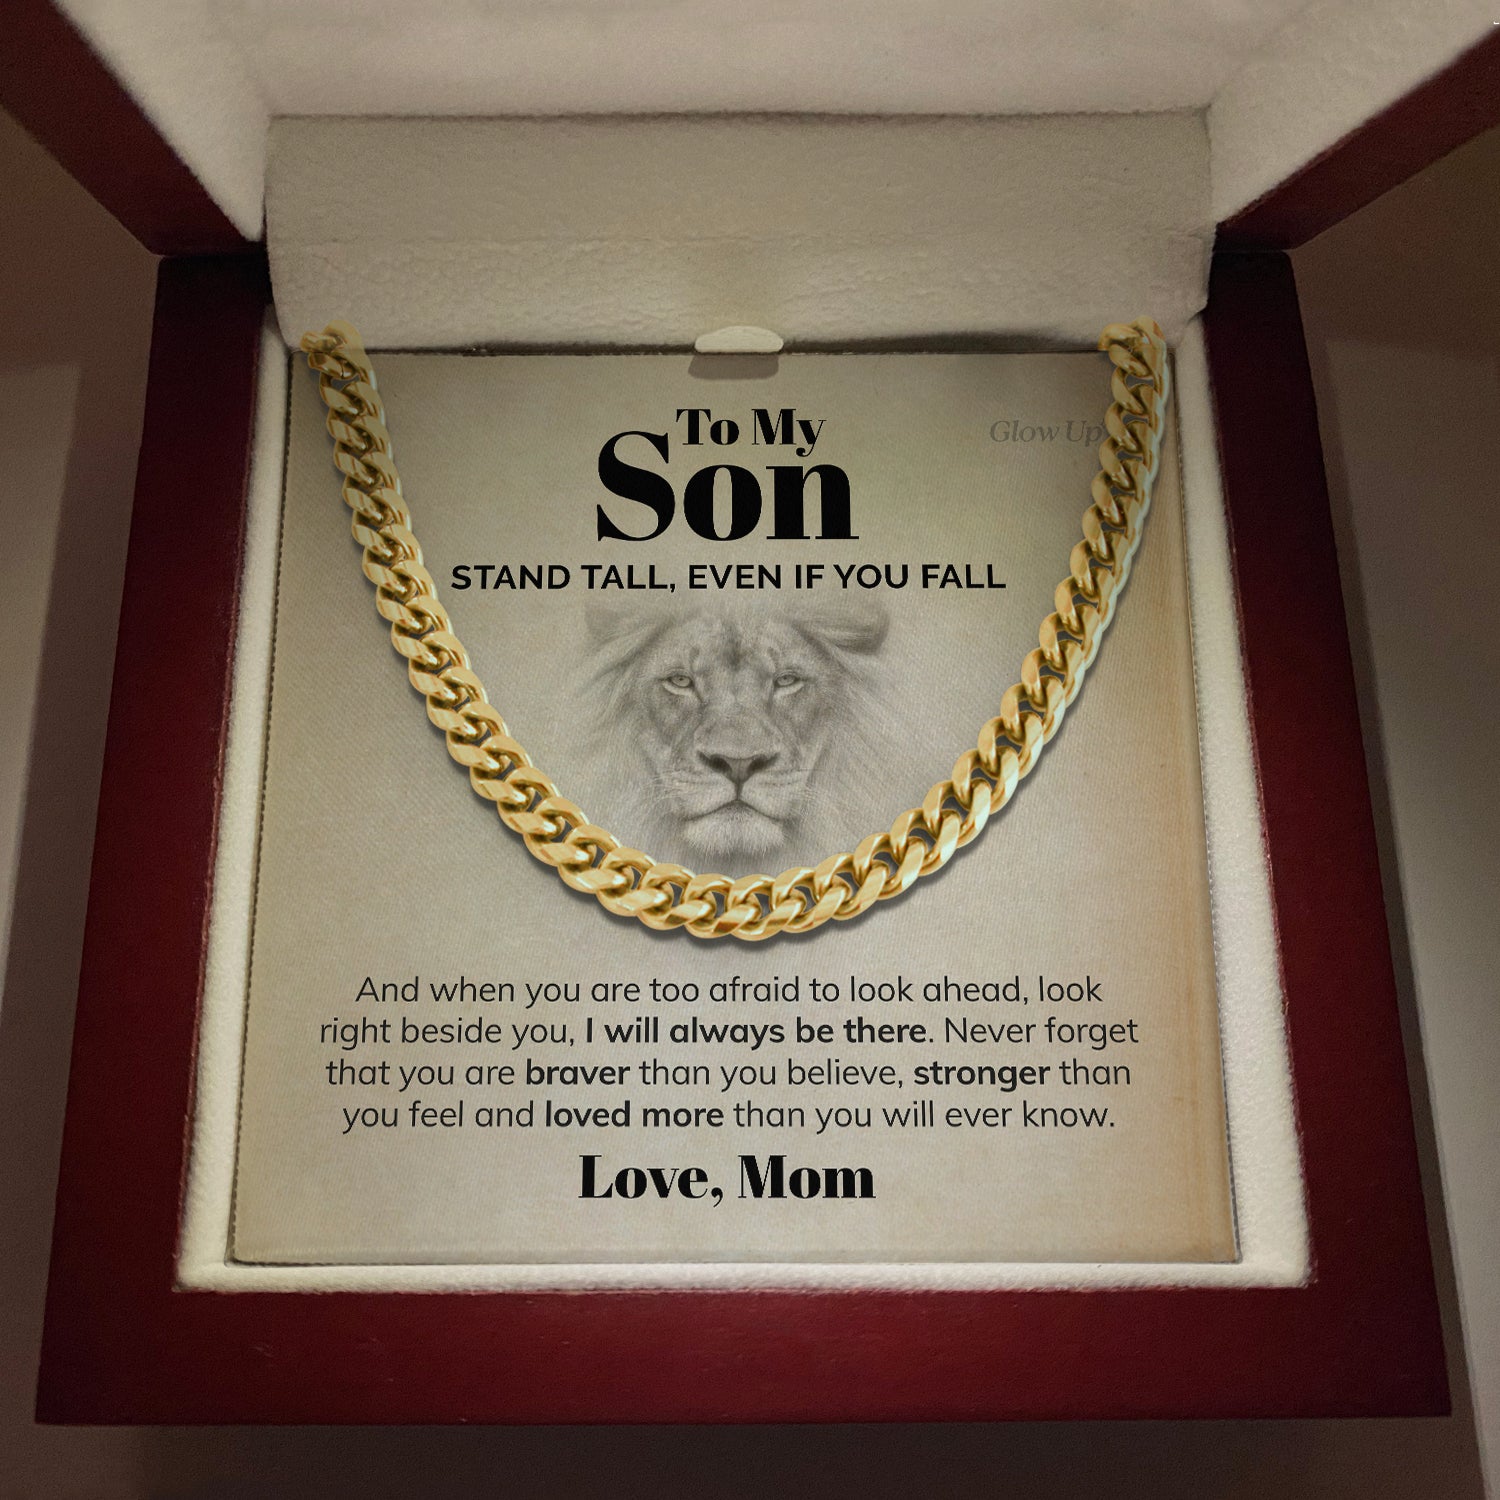 GlowUp 18k Gold Finish / Luxury LED Box To my Son - Stand Tall - Cuban Link Chain Necklace